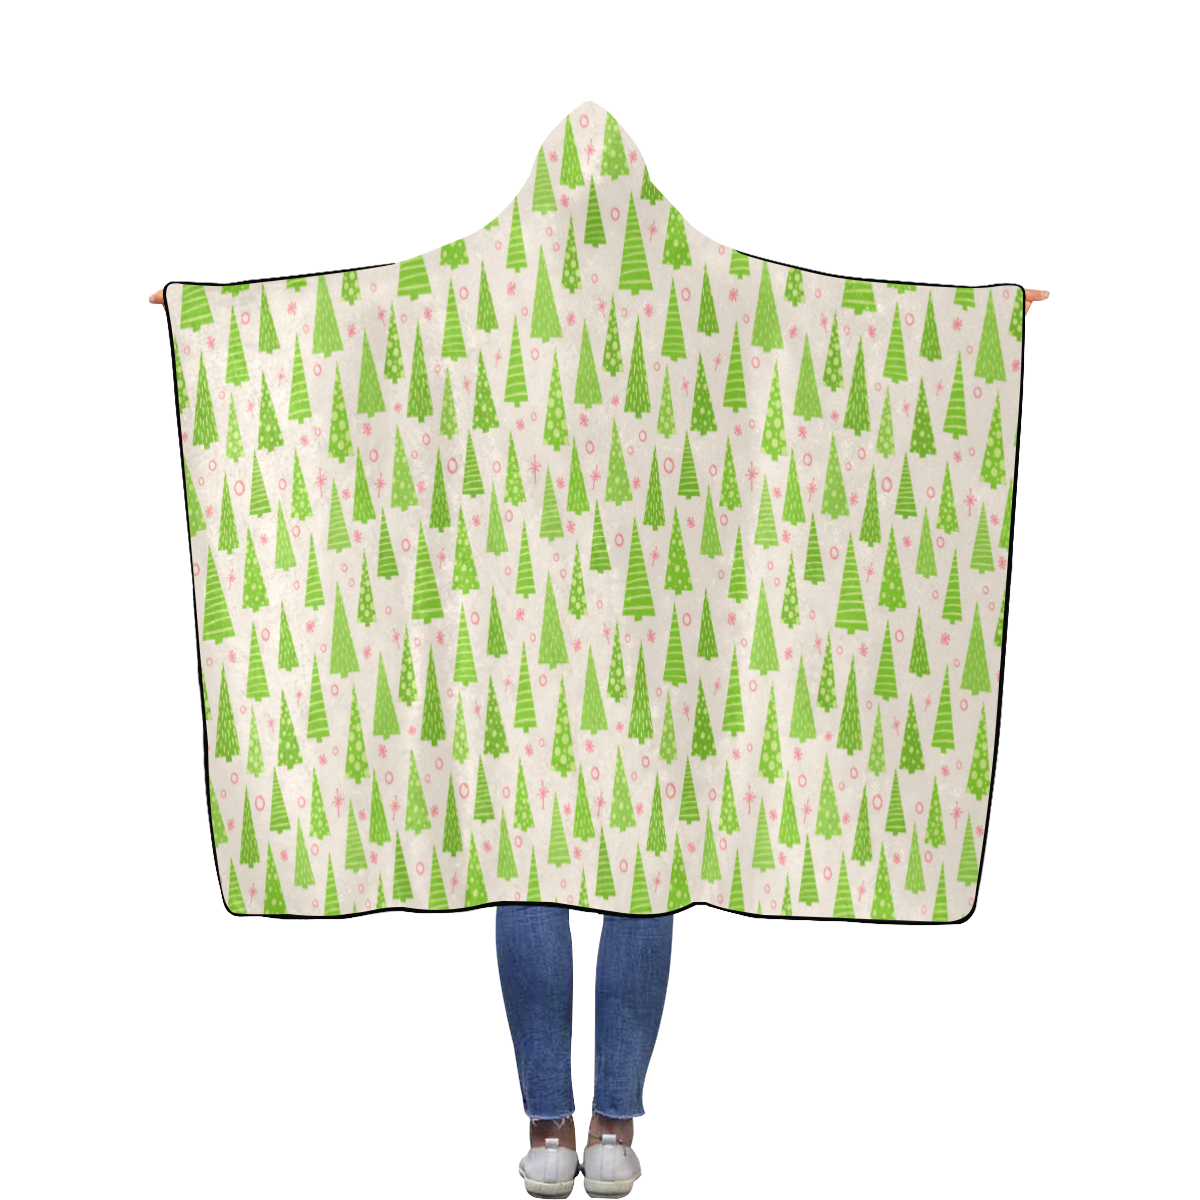 Christmas Trees Forest Flannel Hooded Blanket 56''x80''